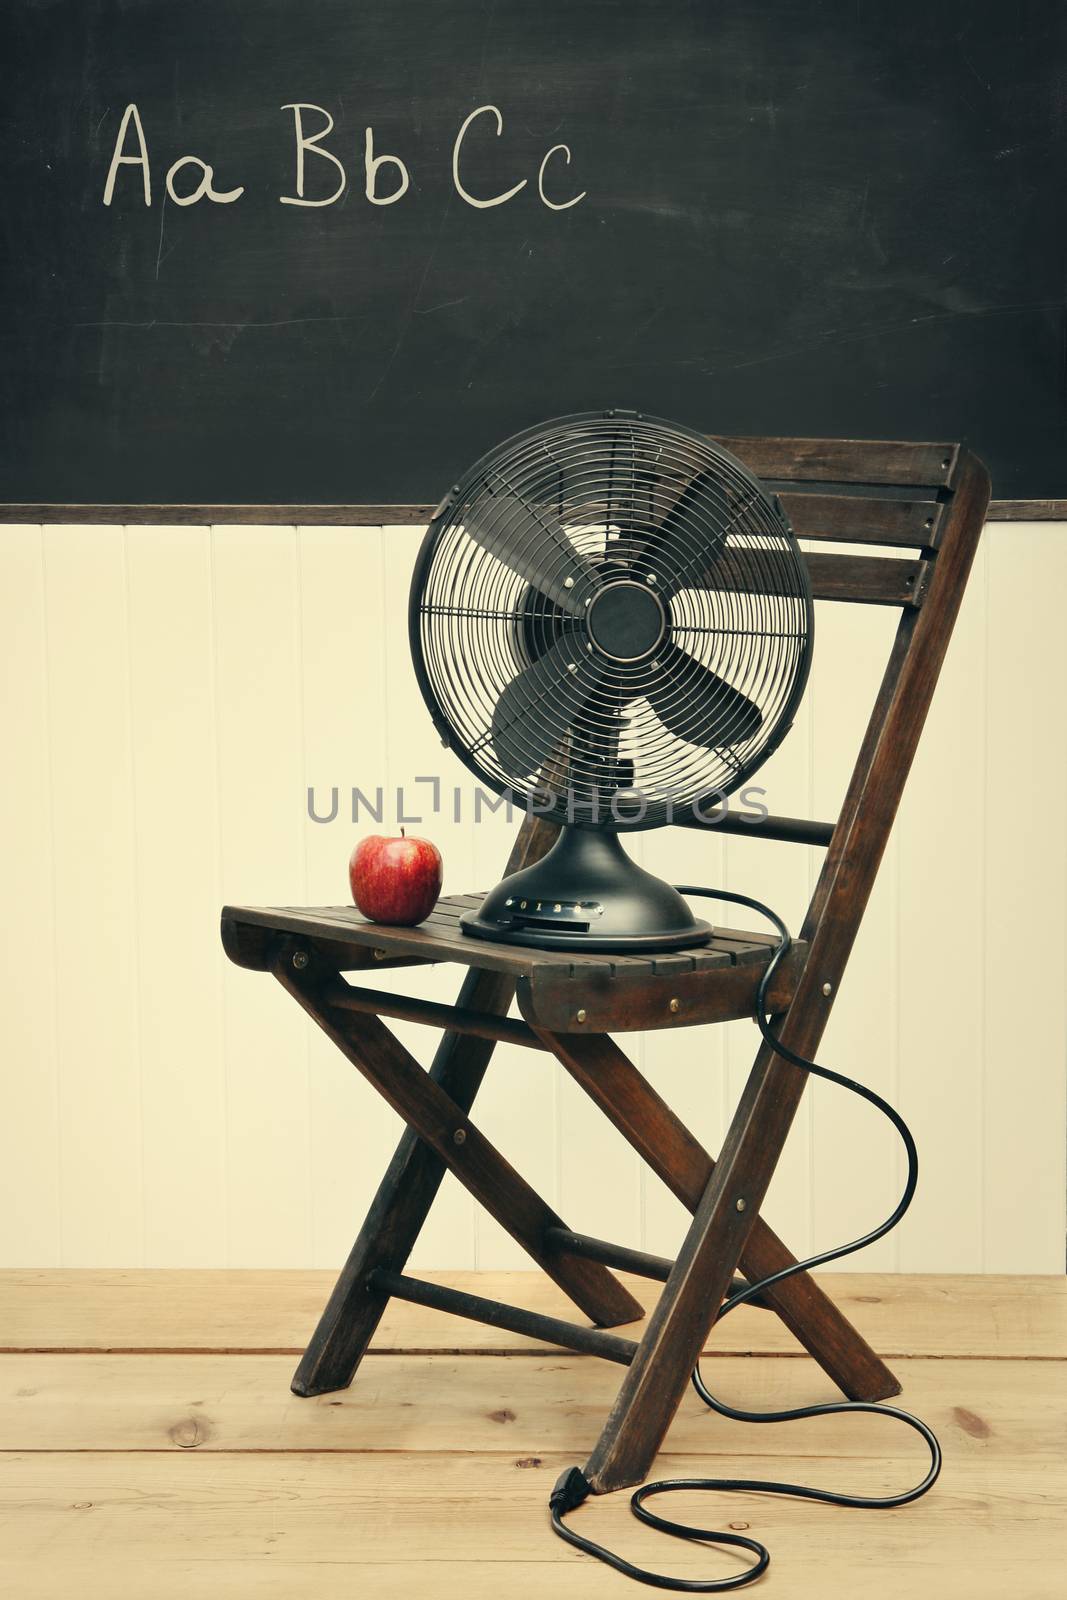 Old fan with apple on chair in school room by Sandralise